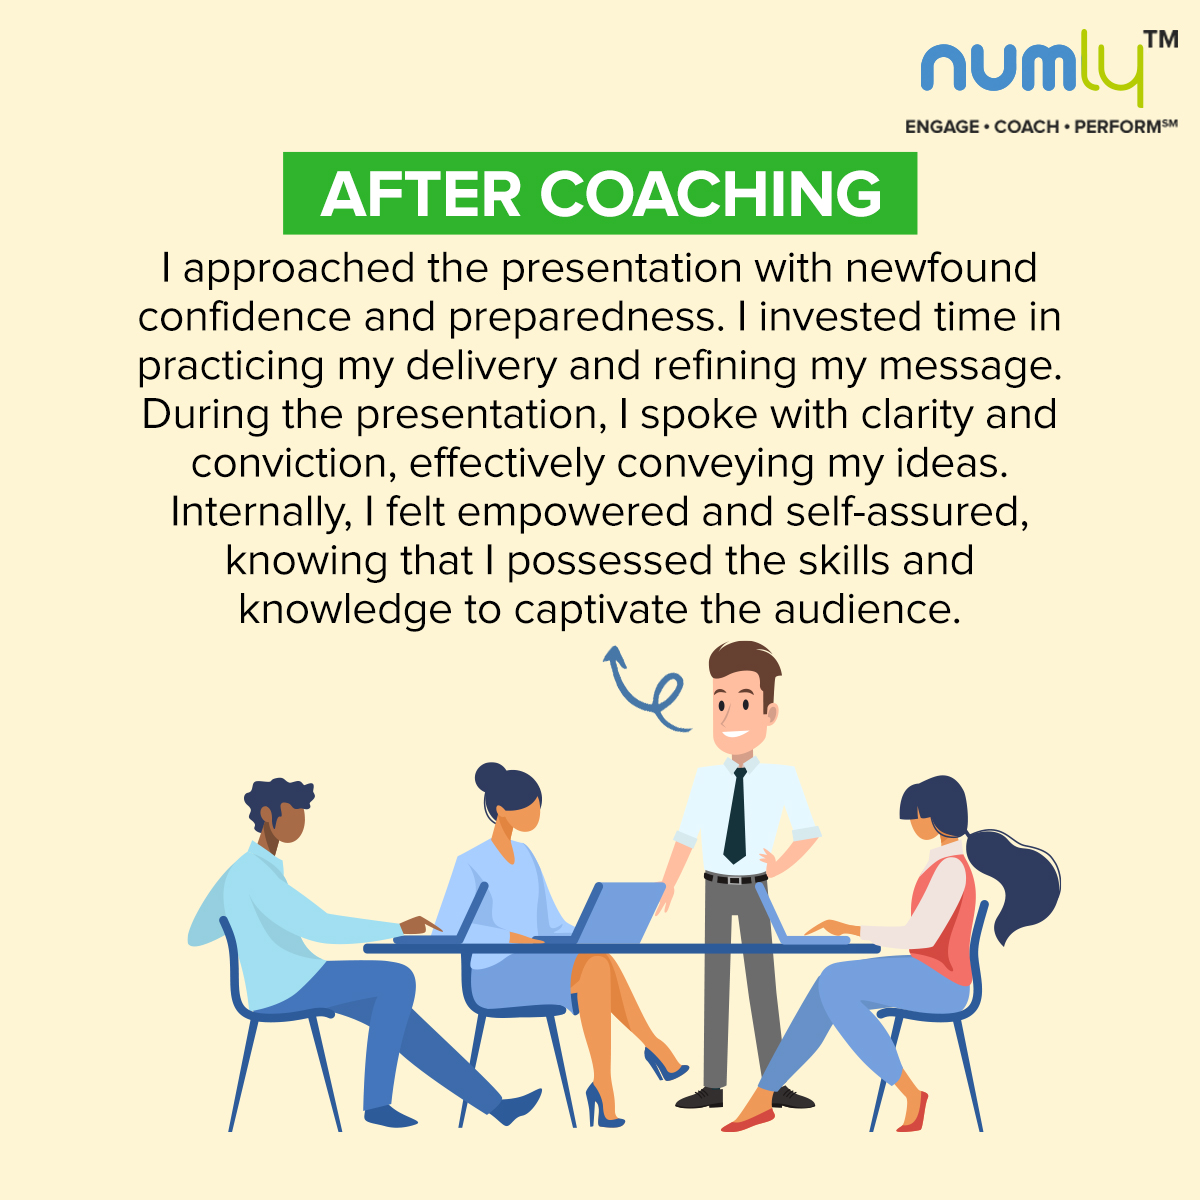 Alex's journey highlights the impact of coaching on leadership. Unlock your potential, navigate challenges, and thrive as a leader. Join Numly's coaching programs for transformative growth and success. bit.ly/3MXMJ8u #LeadershipCoaching #CoachingforSuccess